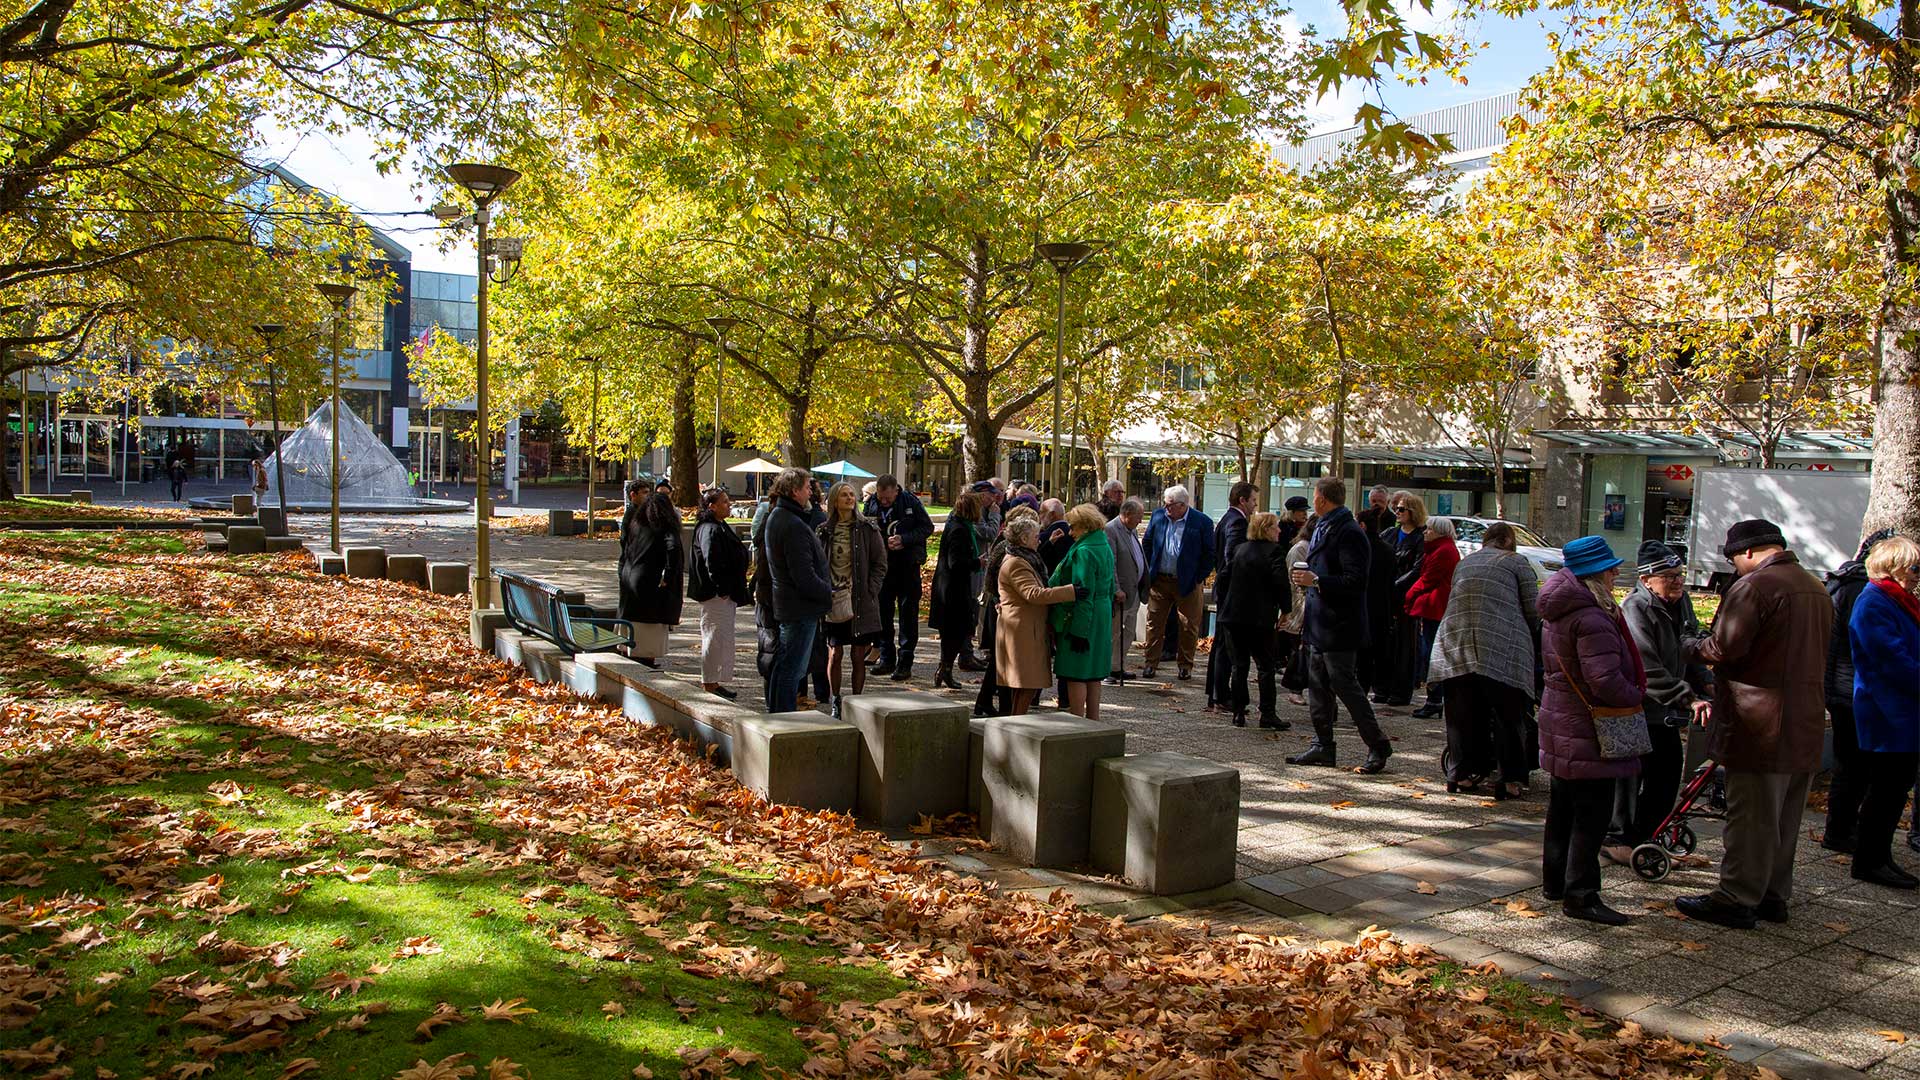 The ACT Honour Walk outside the Canberra Centre under yellow leaves. THere are people gathered chatting and reading the plaques. 